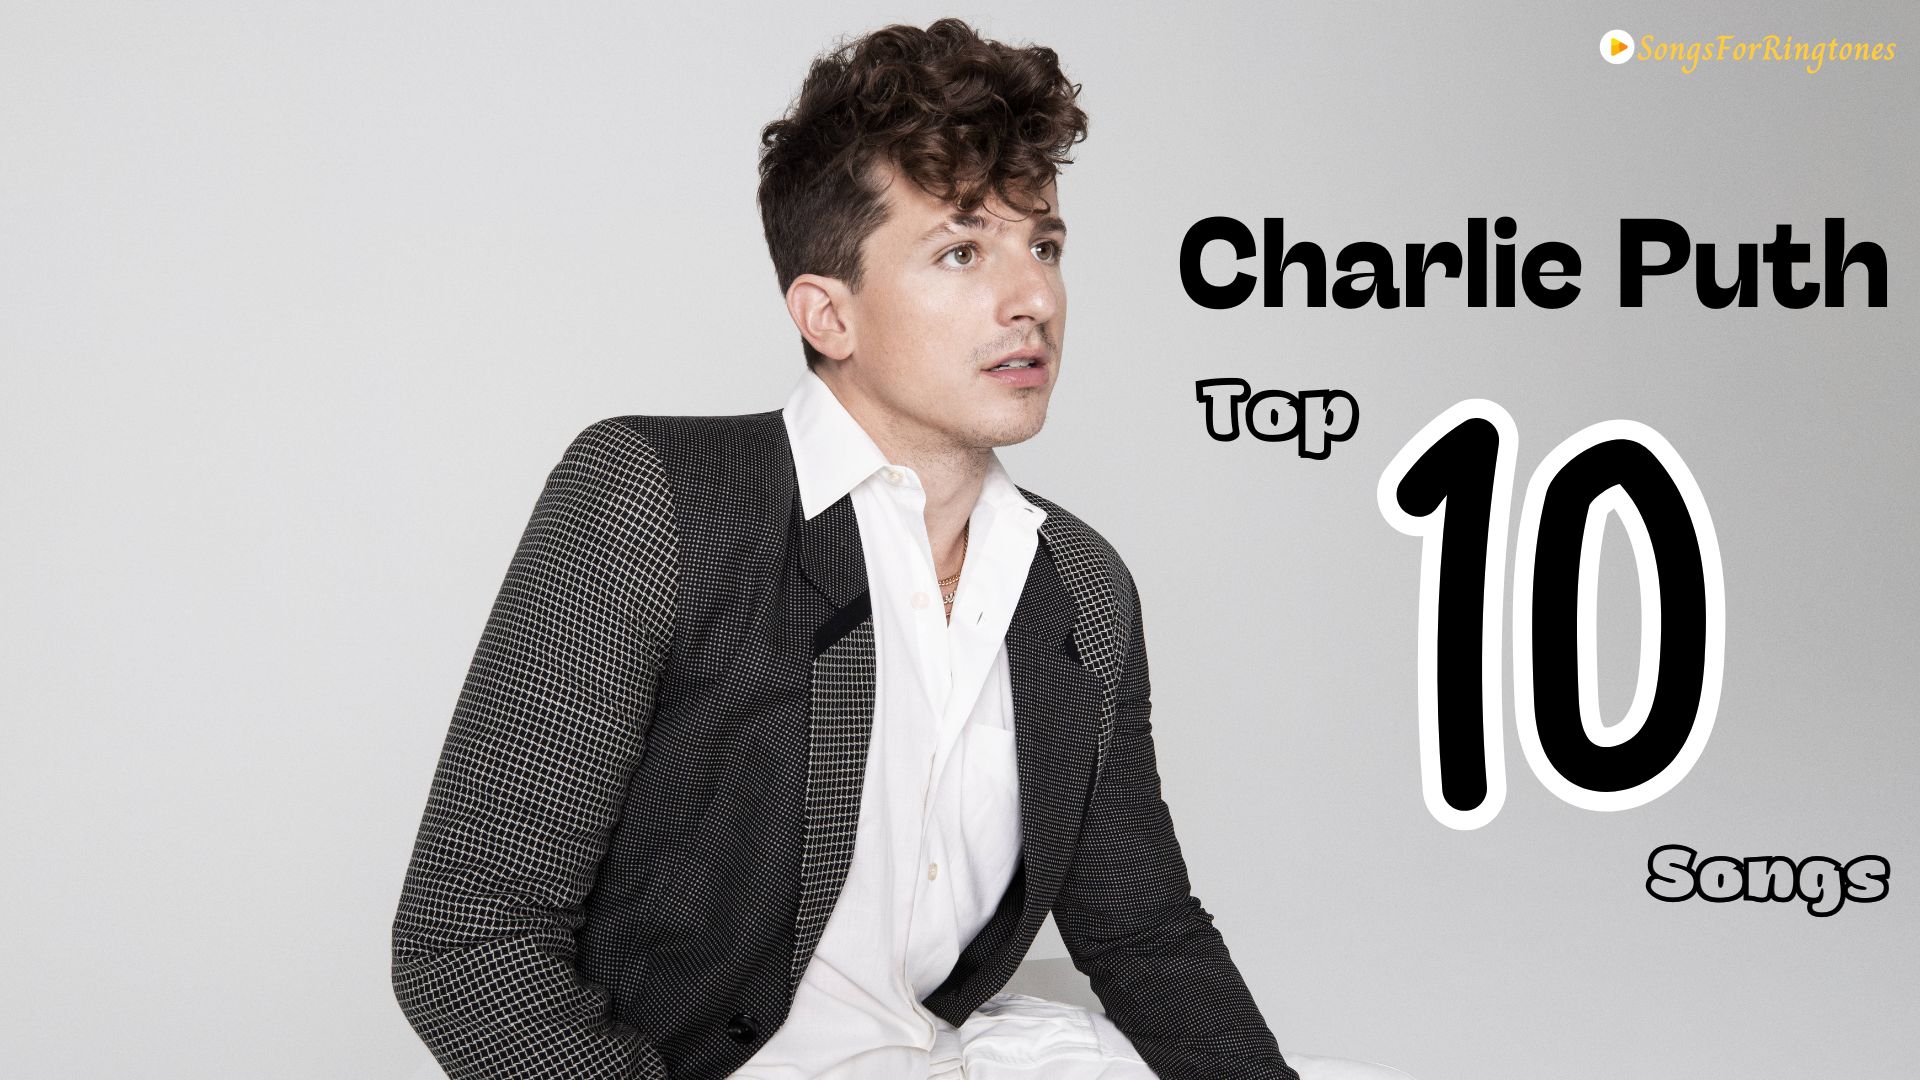 Charlie Puth Top 10 Songs: Playlist of Soulful Melodies